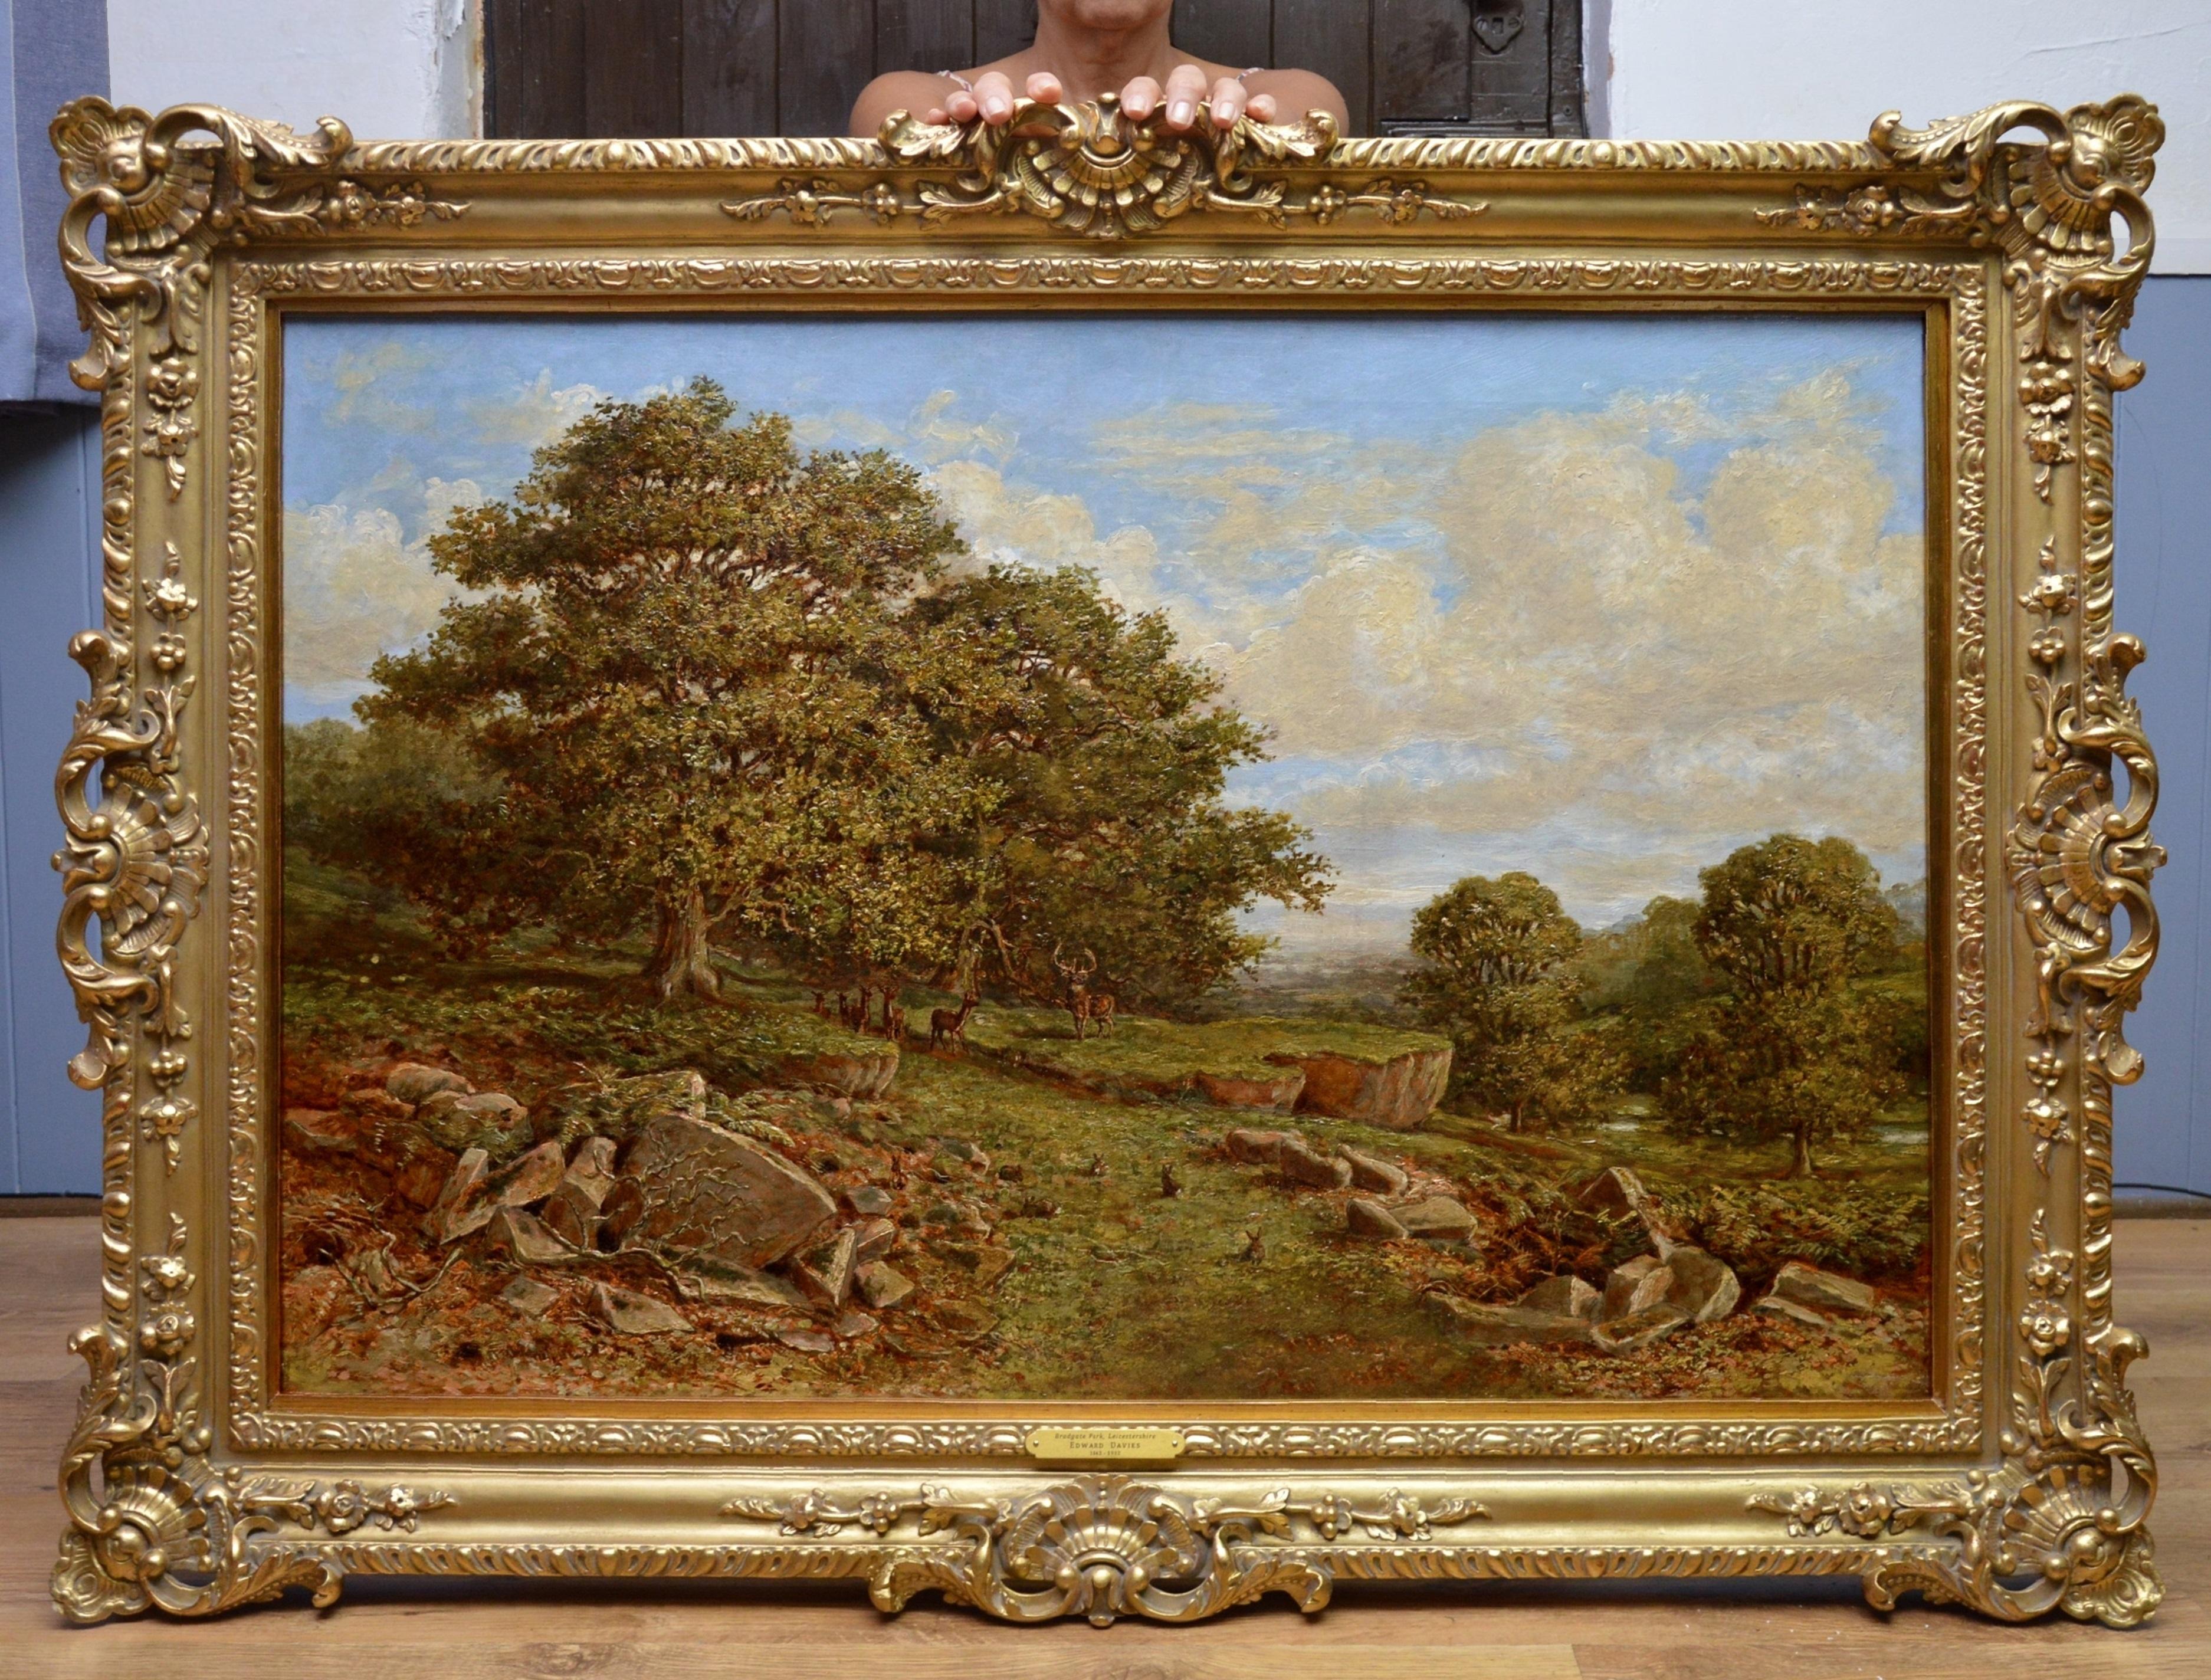 This is a fine large 19th century oil on canvas depicting family of dear and rabbits in an extensive English woodland landscape of ‘Bradgate Park, Leicestershire’ by the eminent Victorian painter Edward Davies (1843-1912). This was the very first